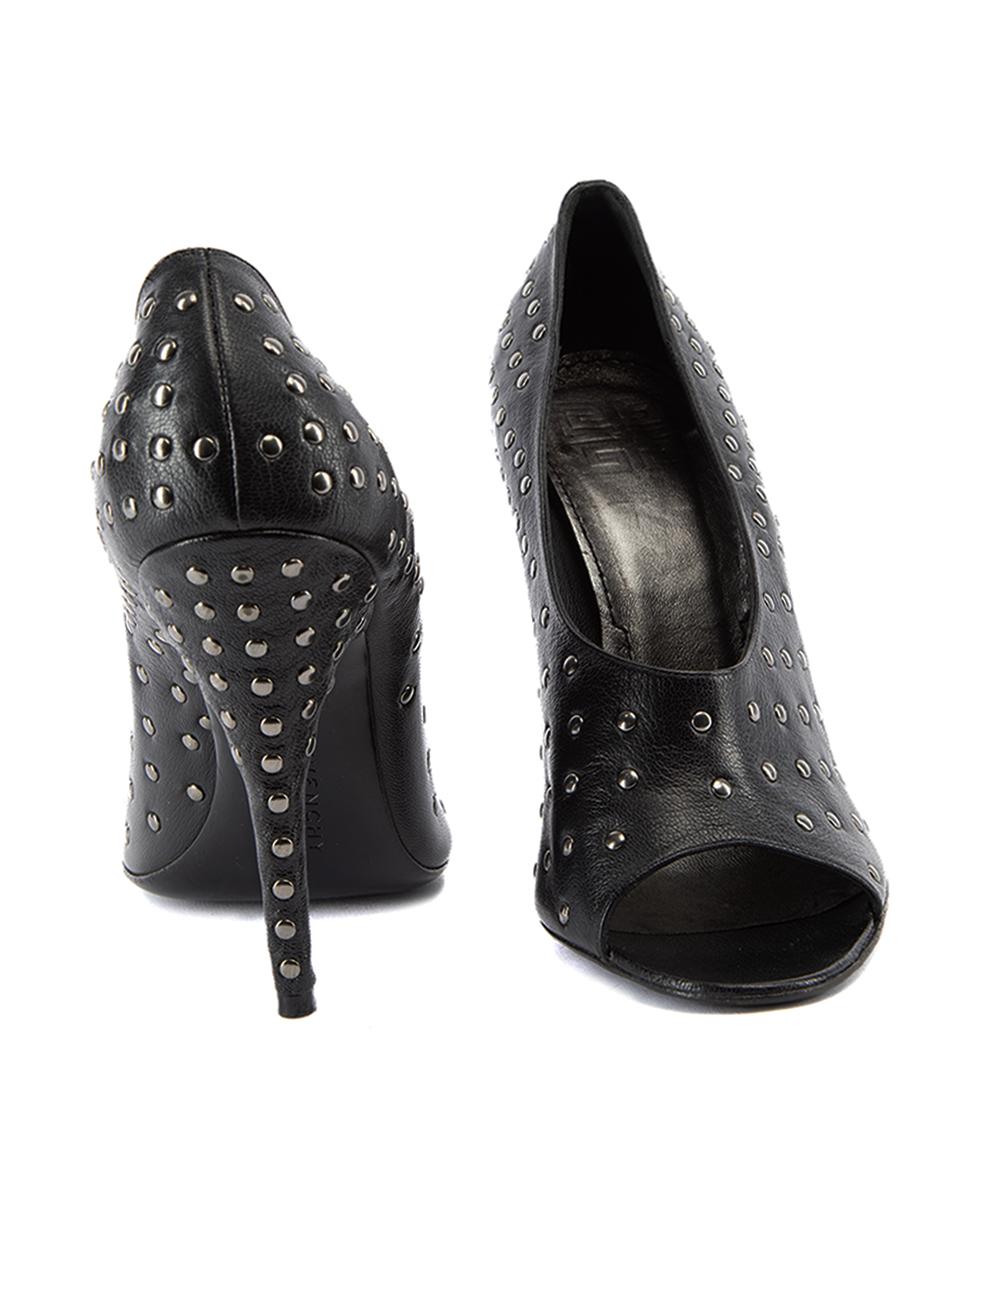 Pre-Loved Givenchy Women's Black Peep Toe Studded Court High Heels In Excellent Condition In London, GB